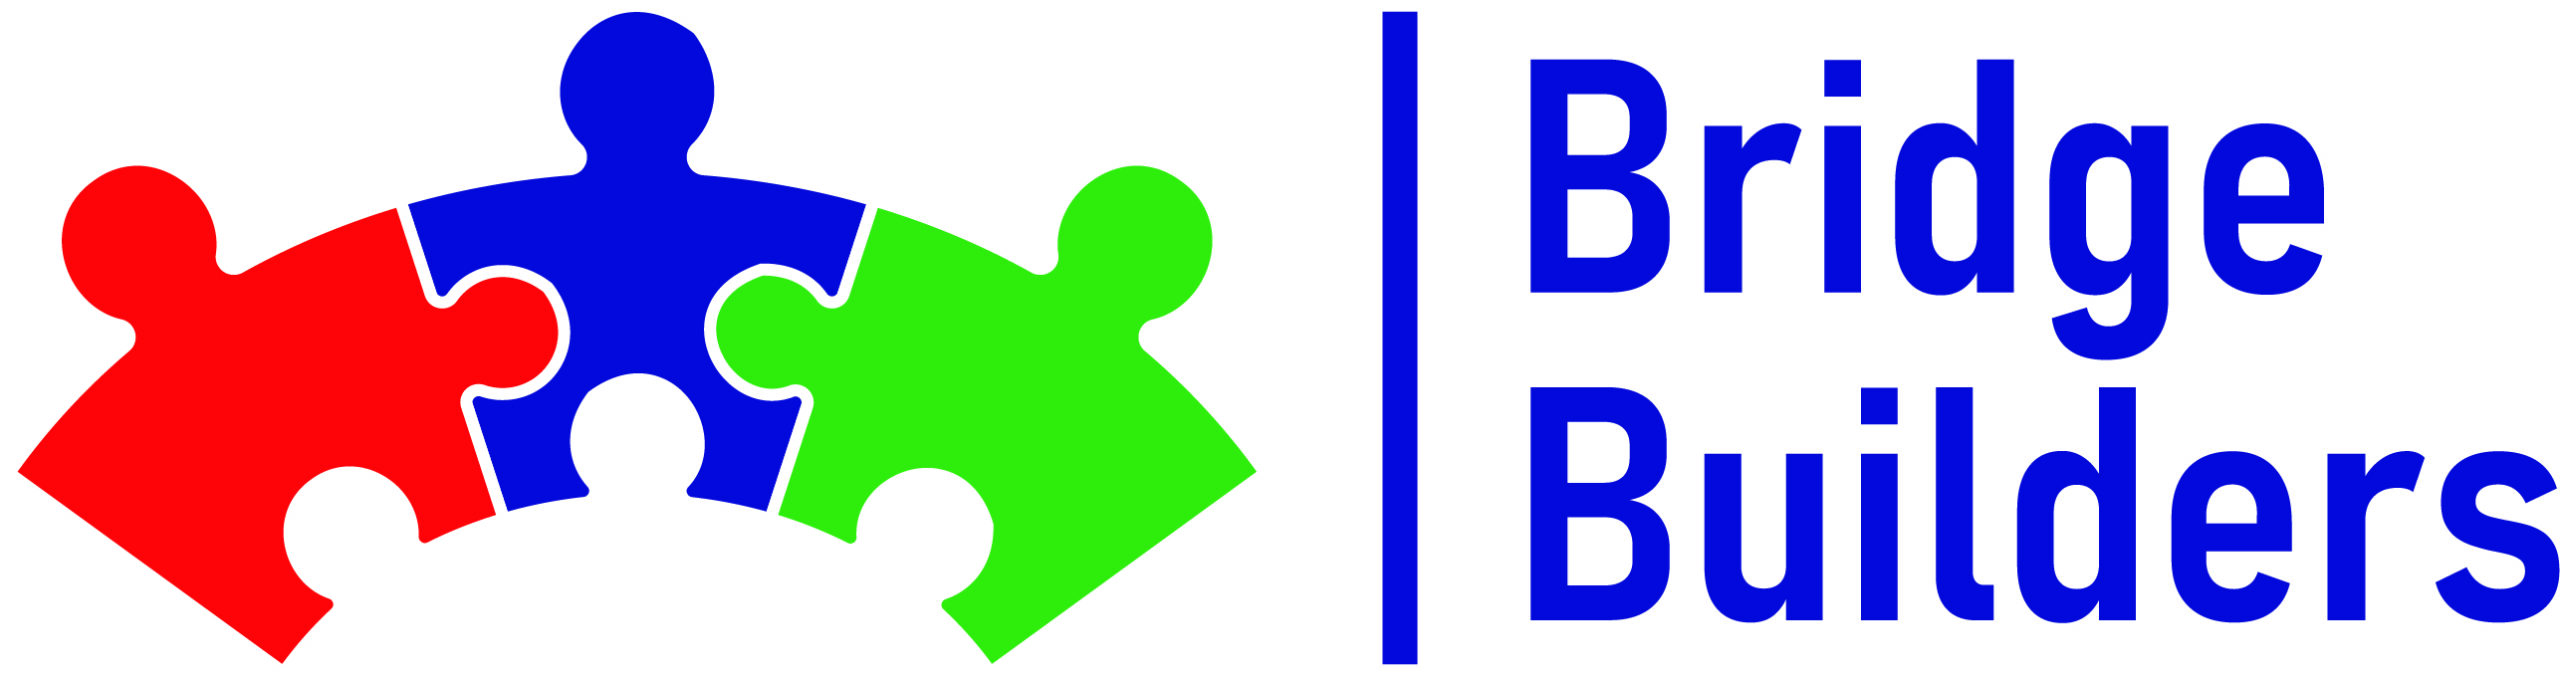 Bridge Builders logo - the middle puzzle piece like a person joining the outer two together, making a bridge